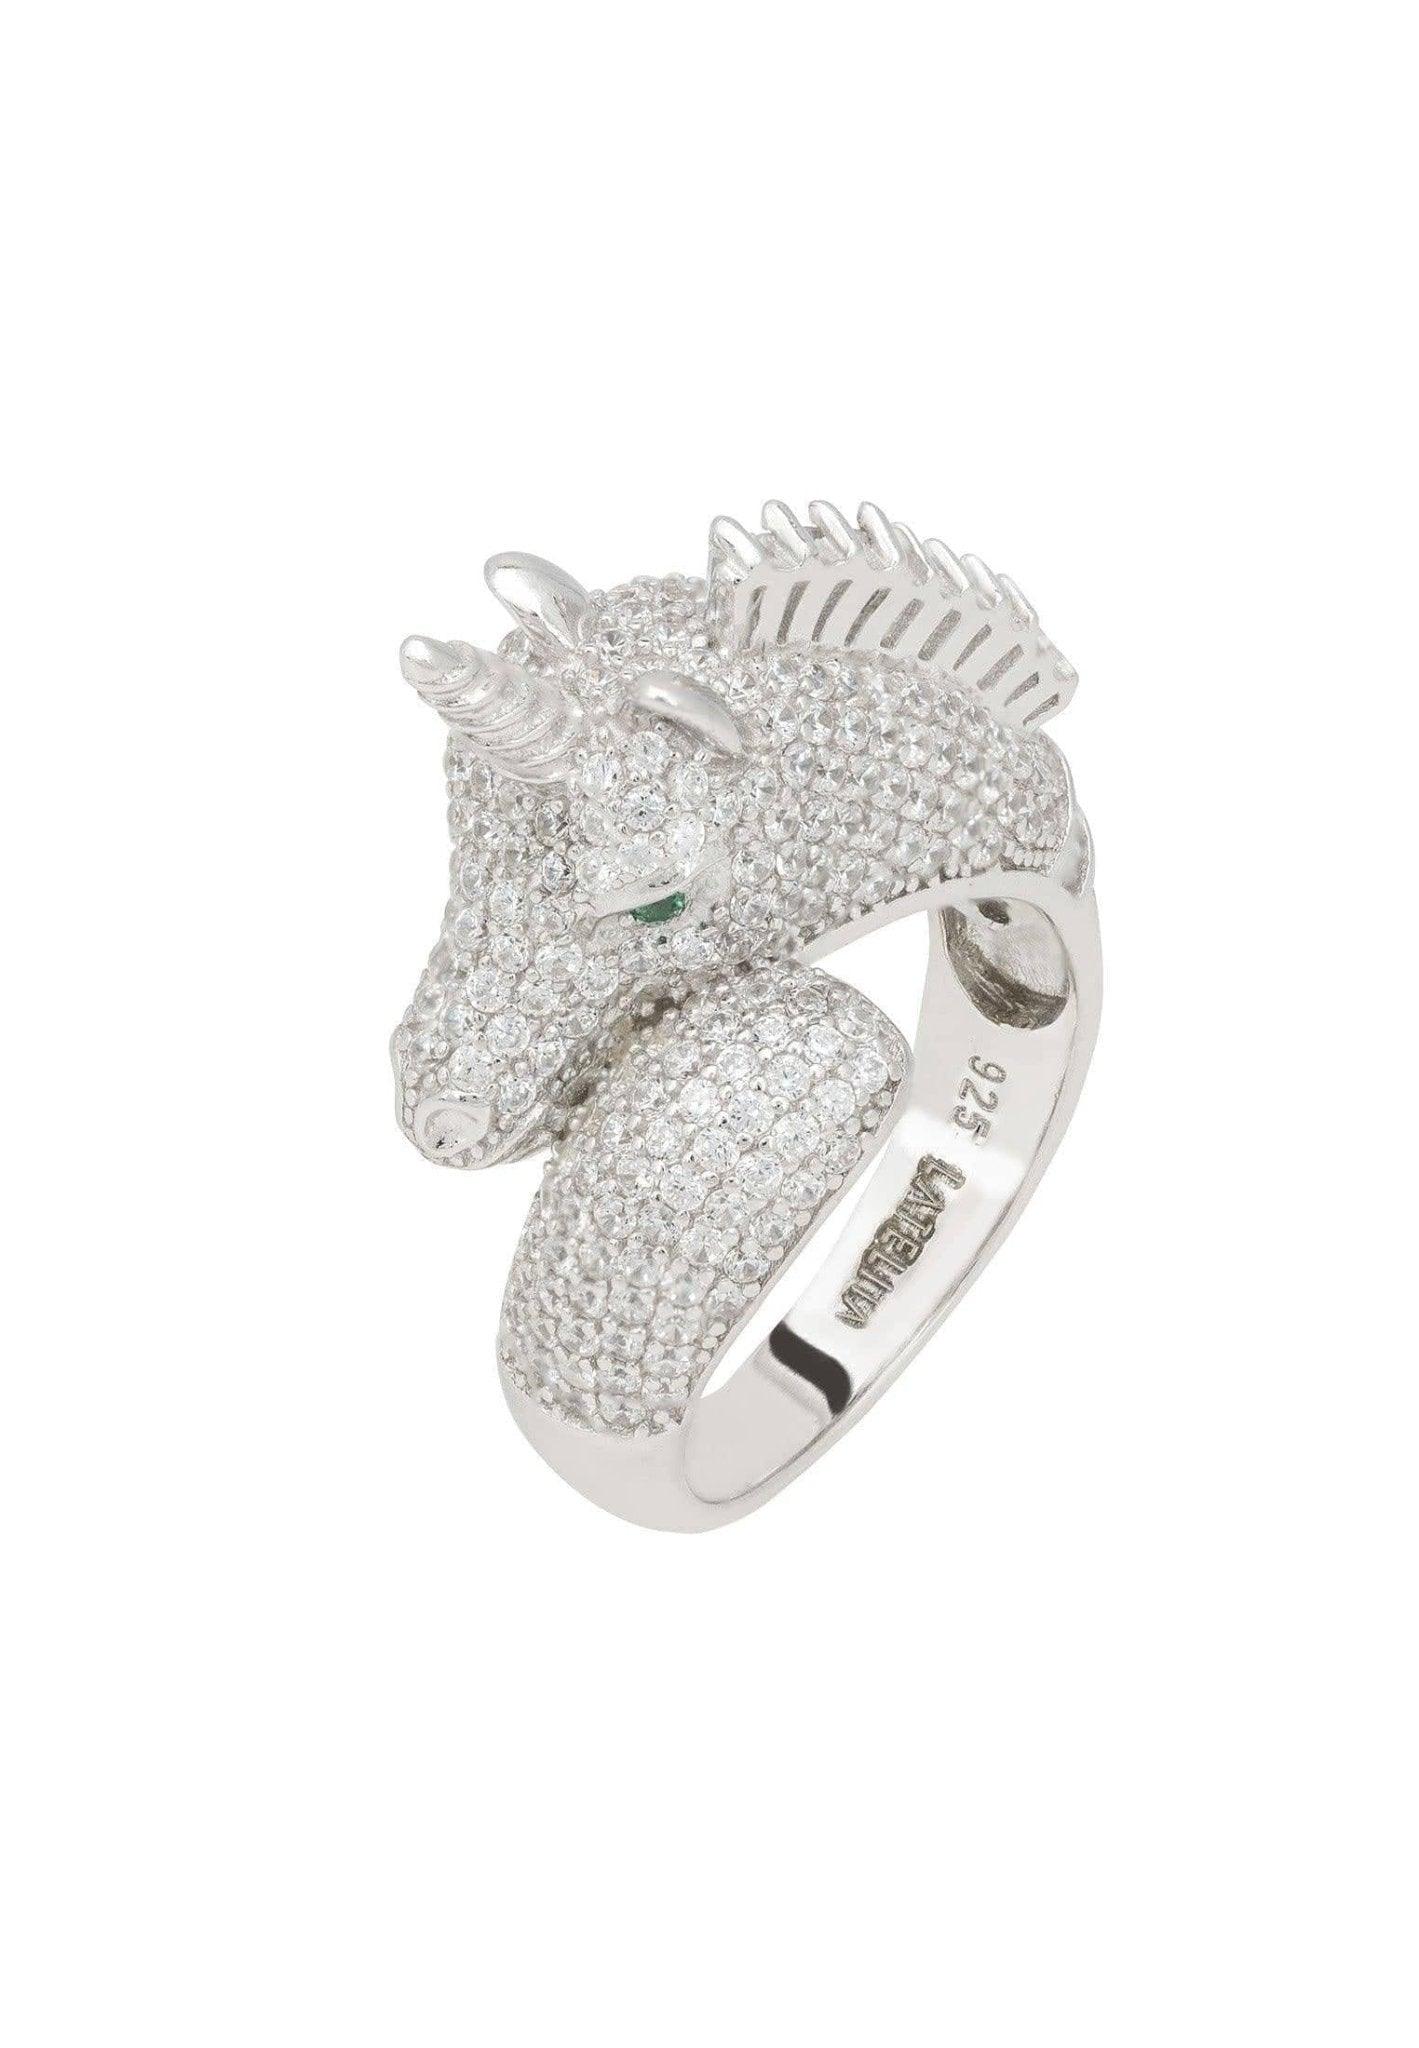 Unicorn CZ Sparkling Ring Sterling Silver